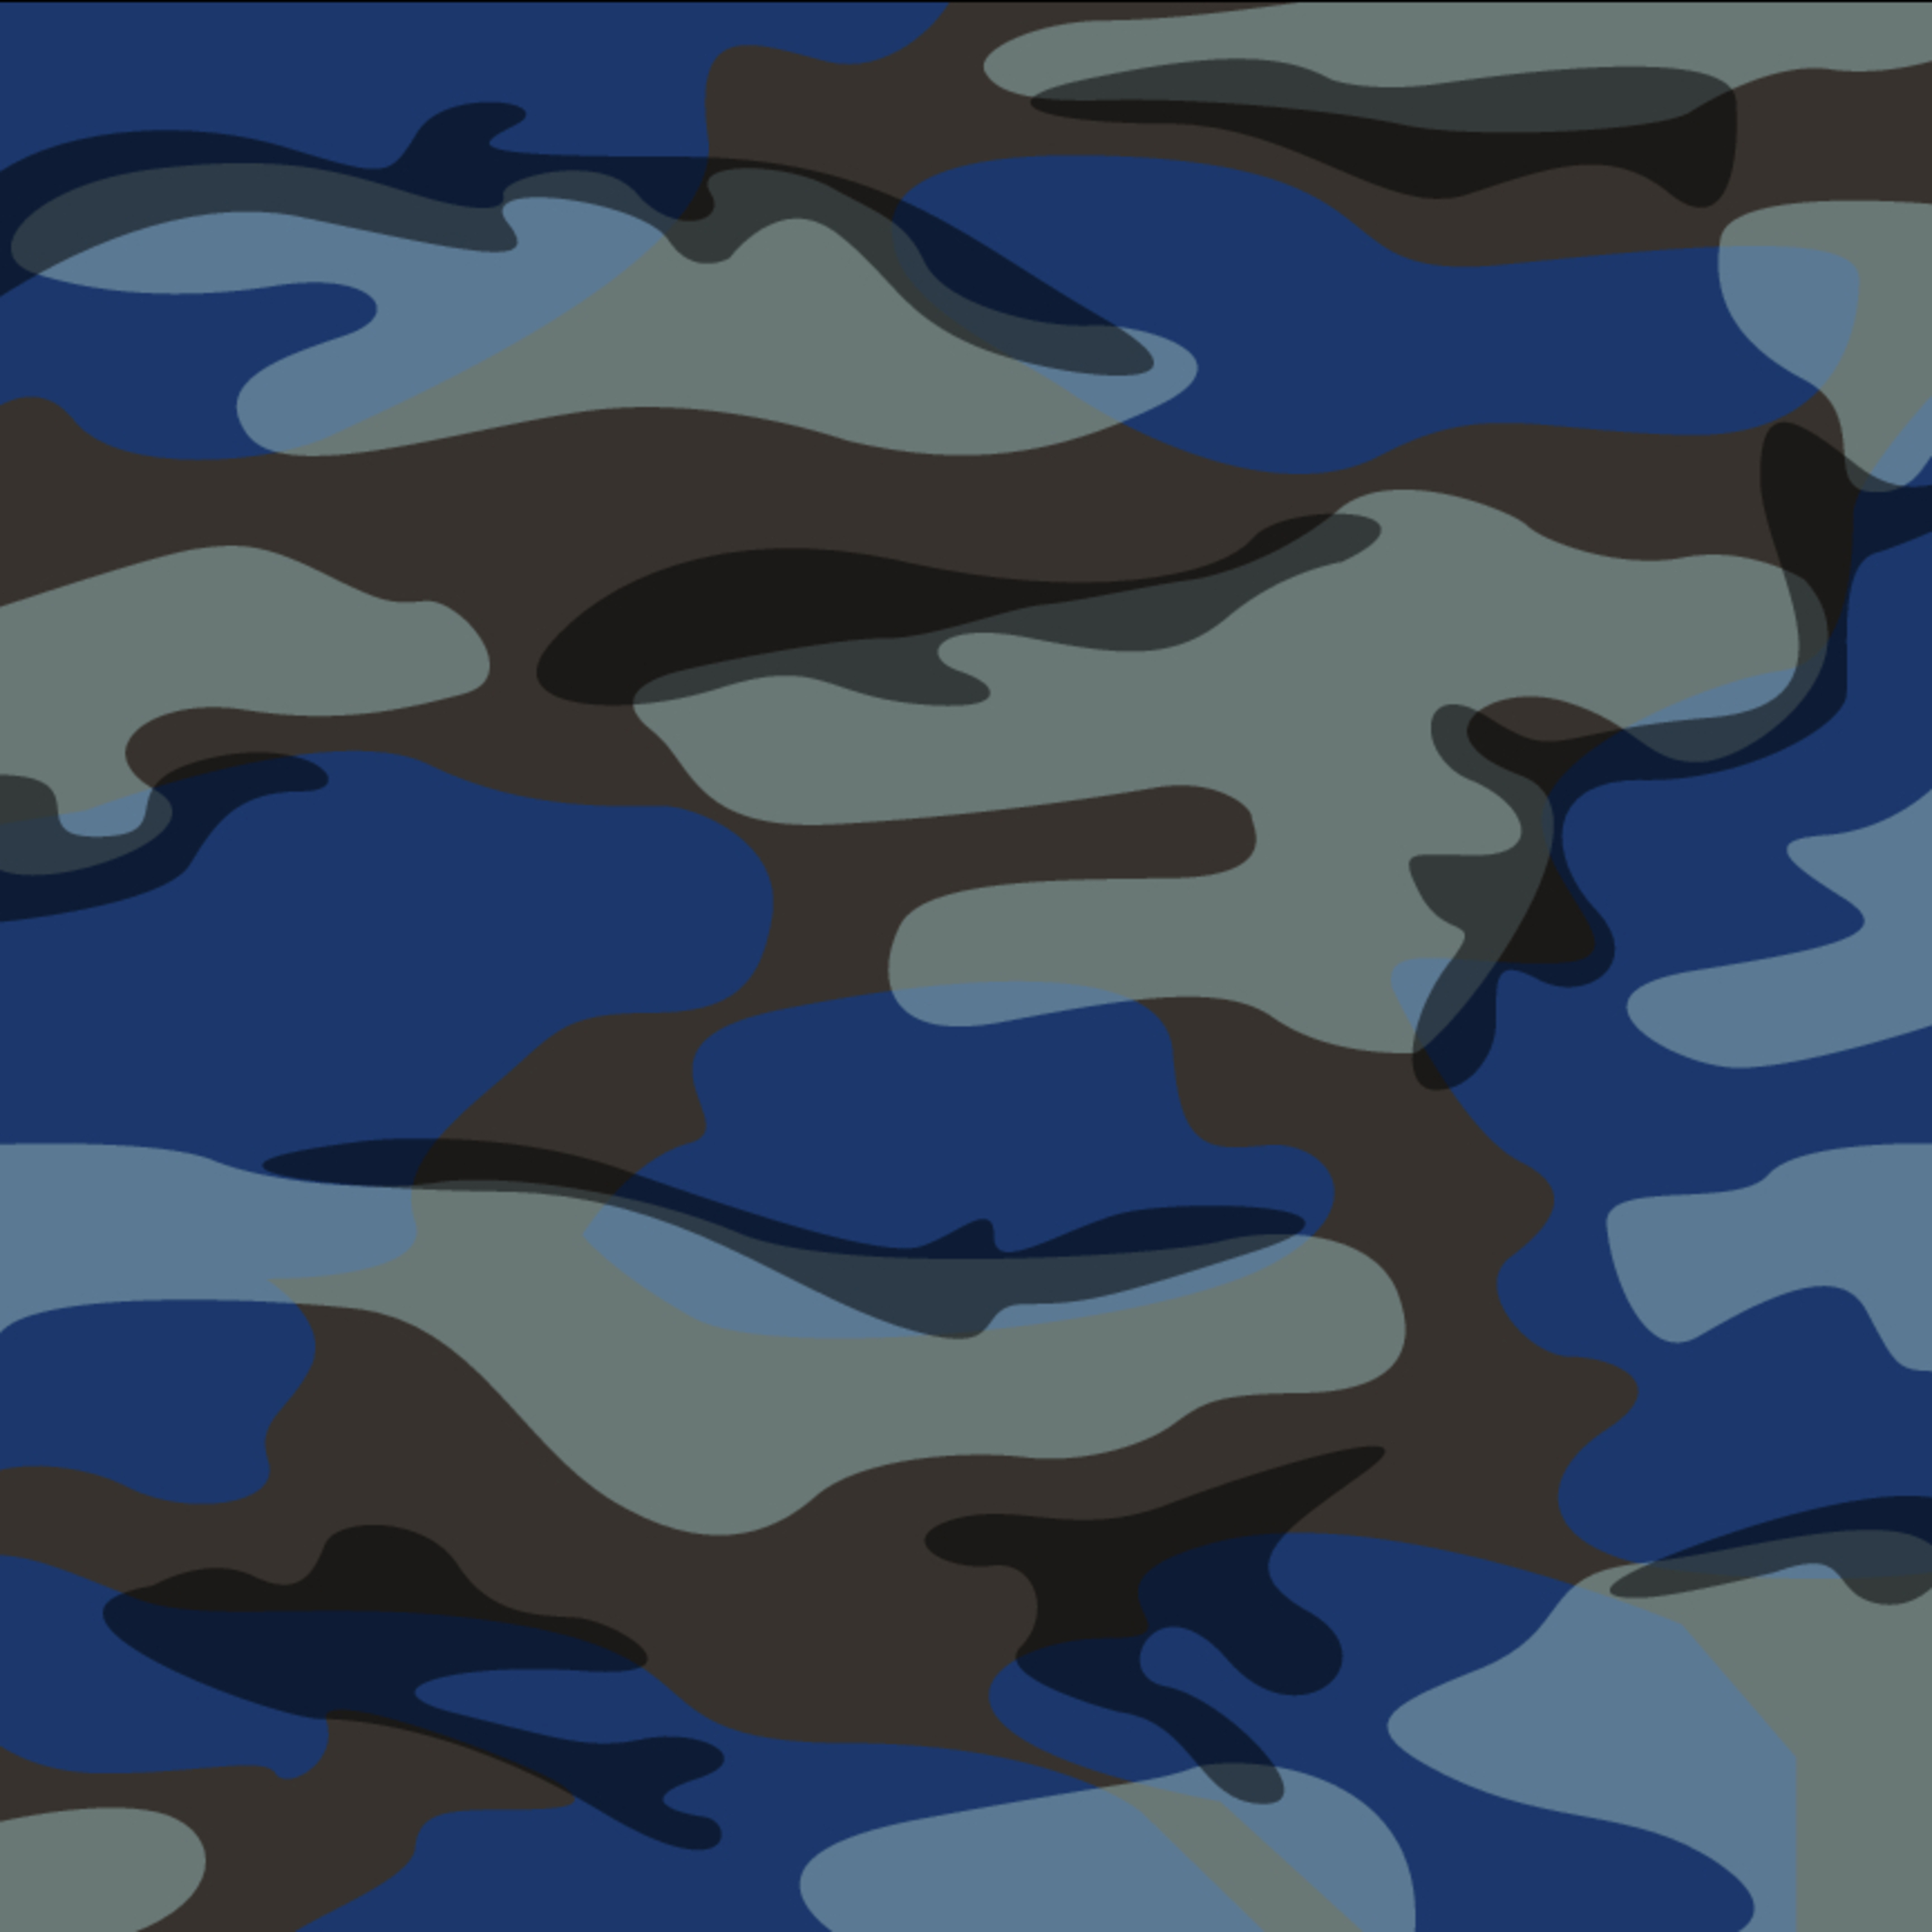 Blue Camo Mural By Andy Kocher - Murals Your Way